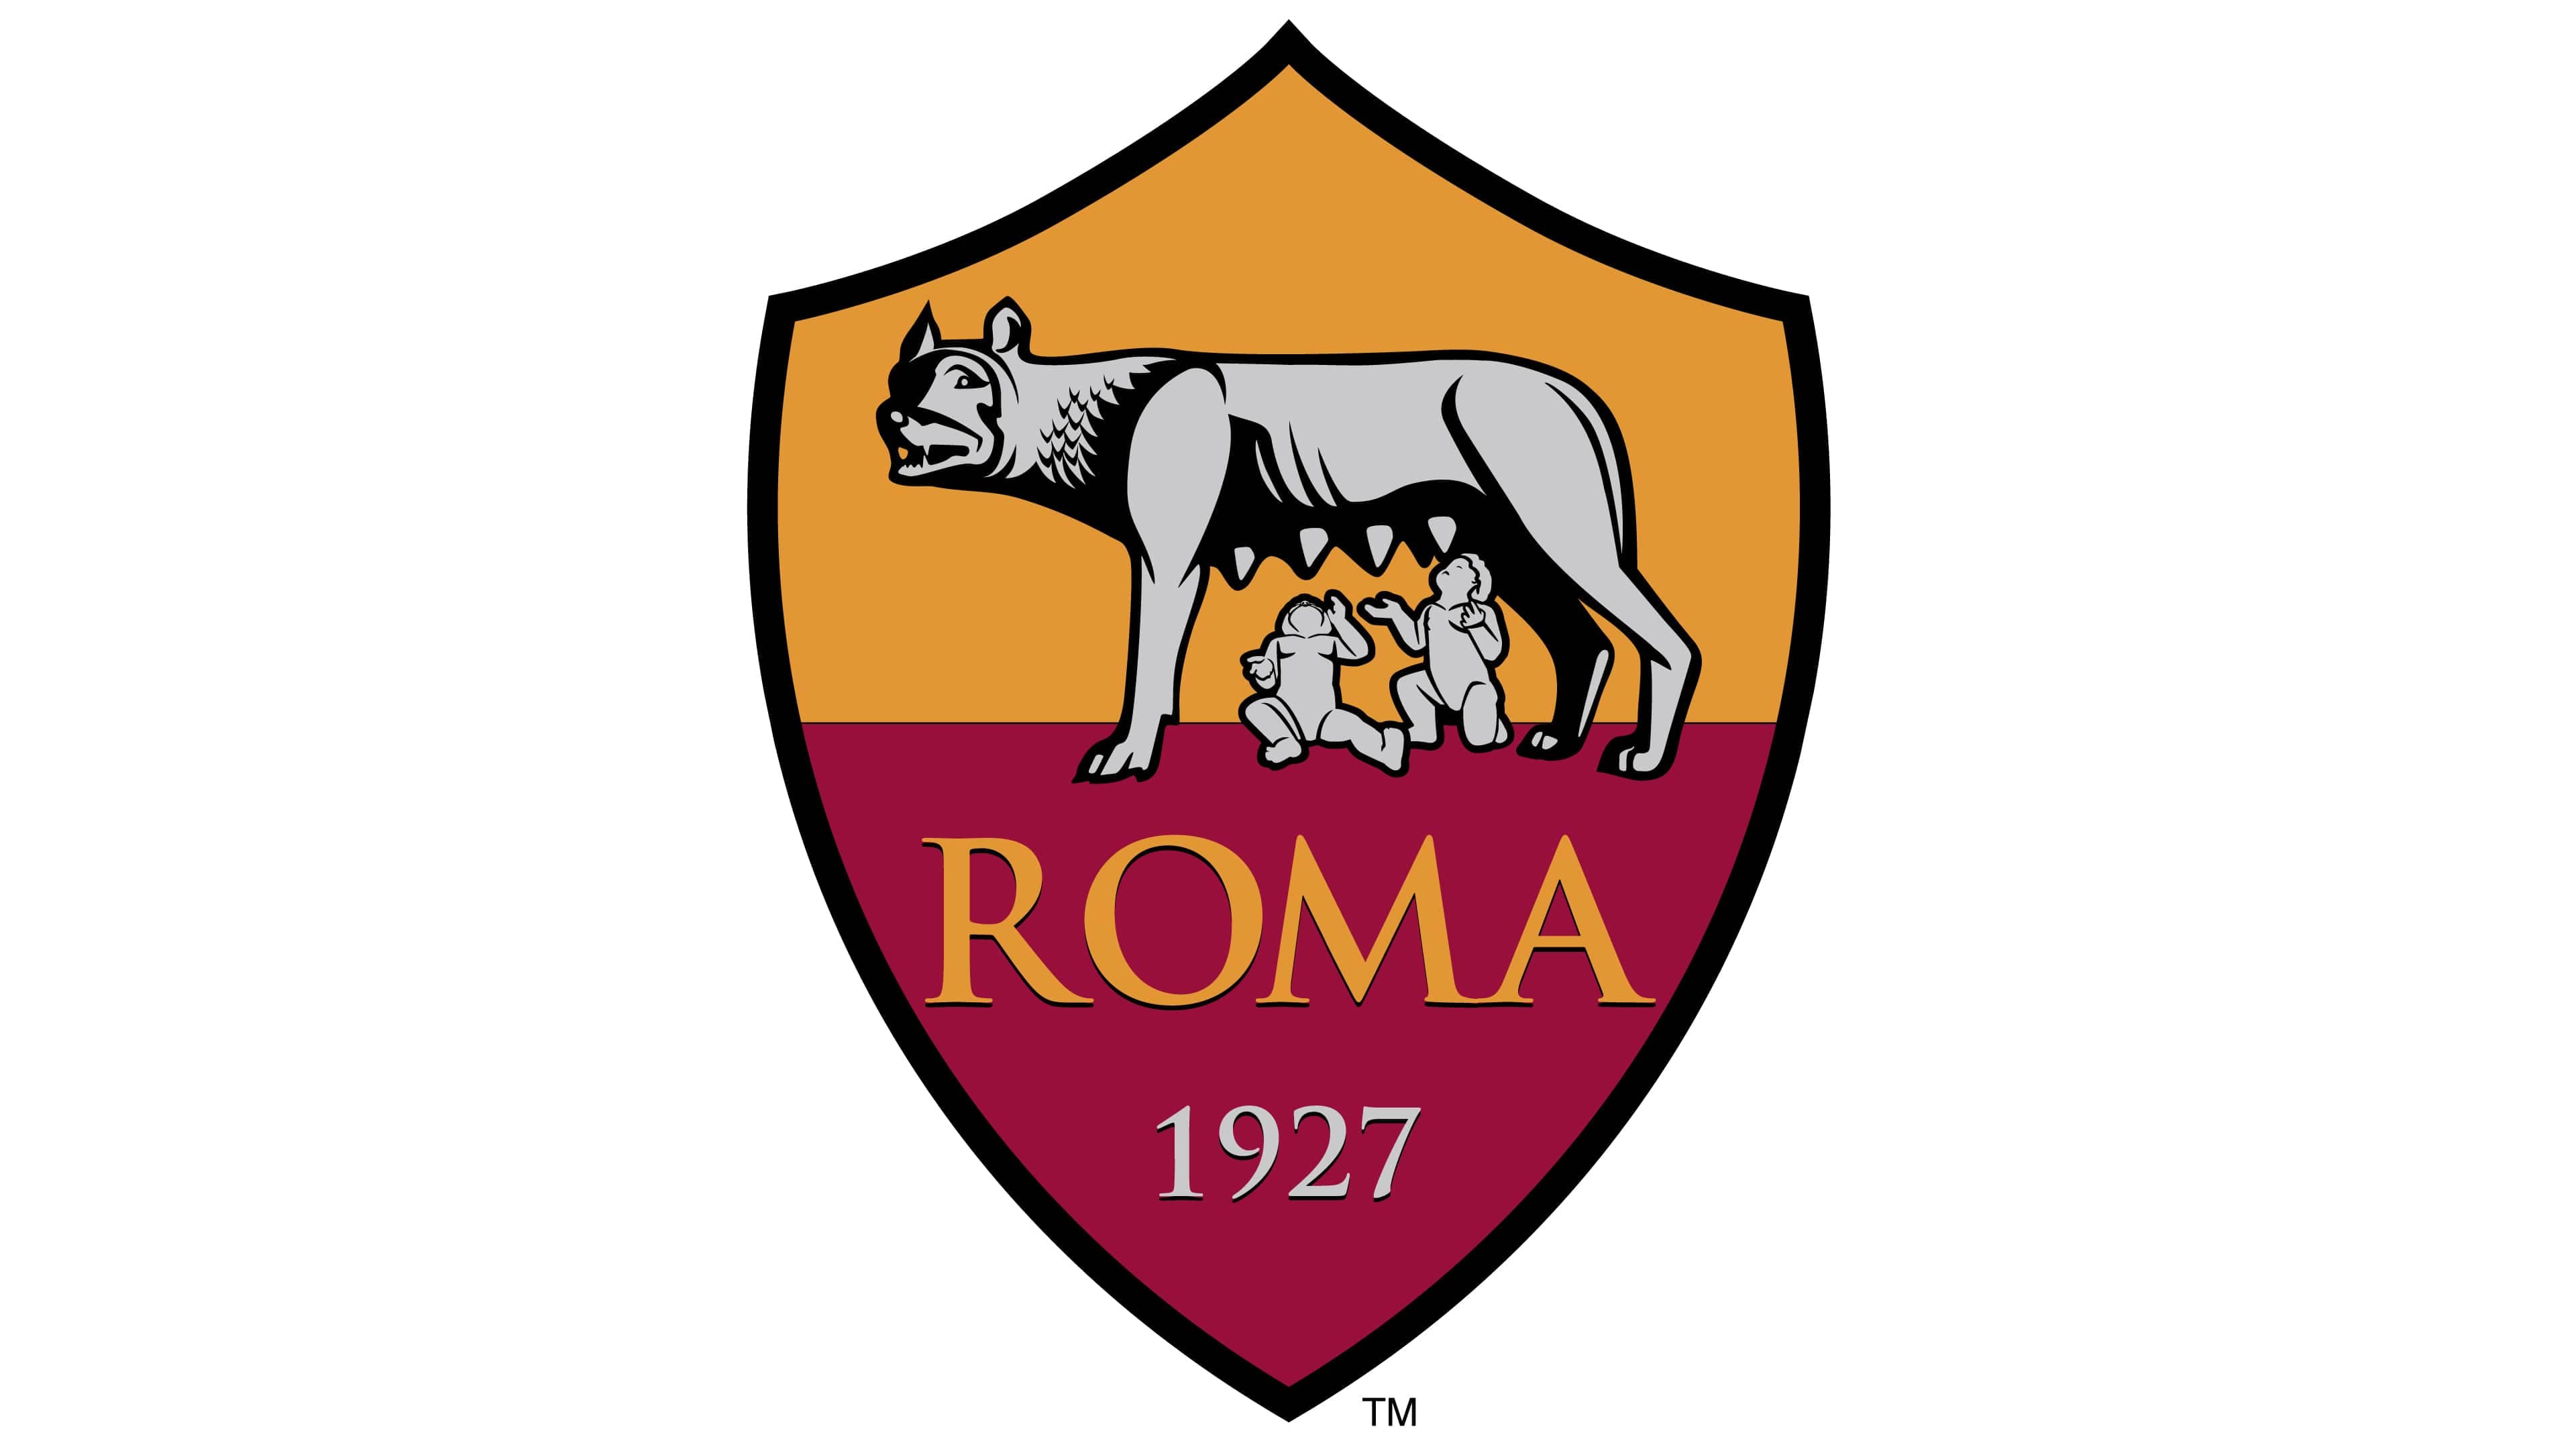 Roma Logo, PNG, Symbol, History, Meaning